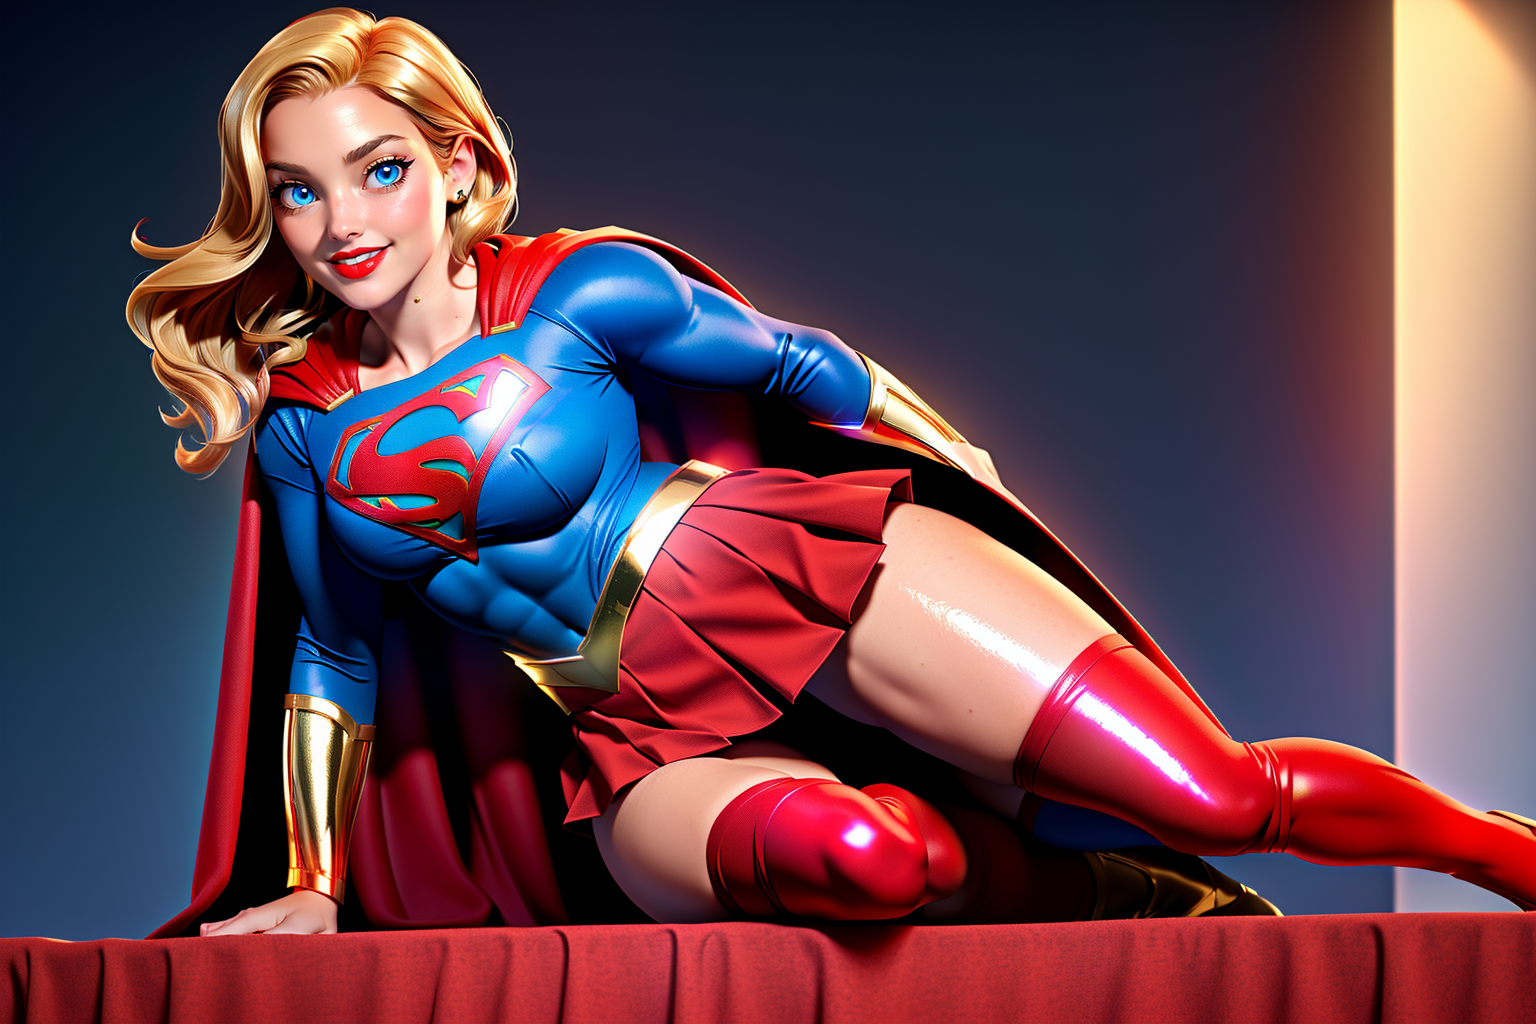 General 1536x1024 AI art Supergirl DC Comics superhero lying down toned female thigh-highs thighs long hair juicy lips red lipstick lipstick blue eyes blonde looking at viewer skirt cape superman logo